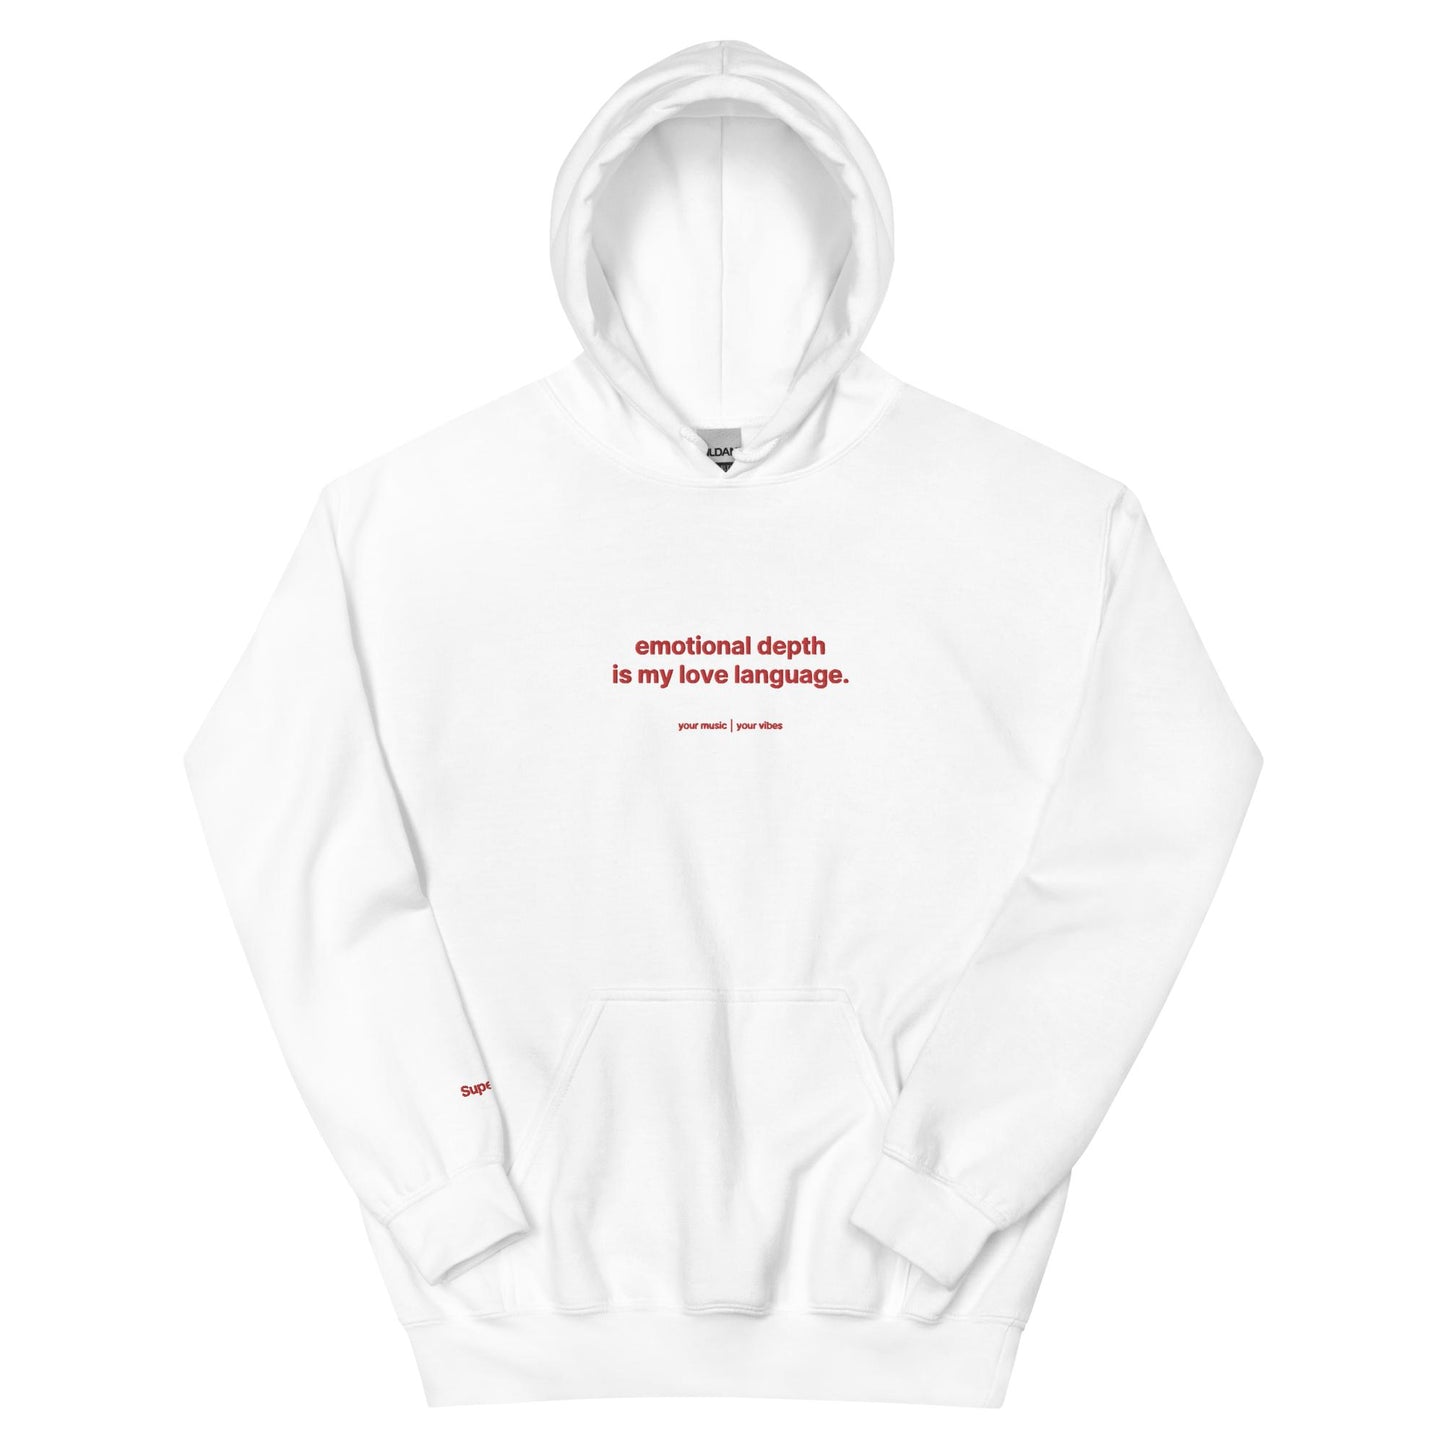 "emotional depth is my love language" | limited edition embroidered unisex hoodie